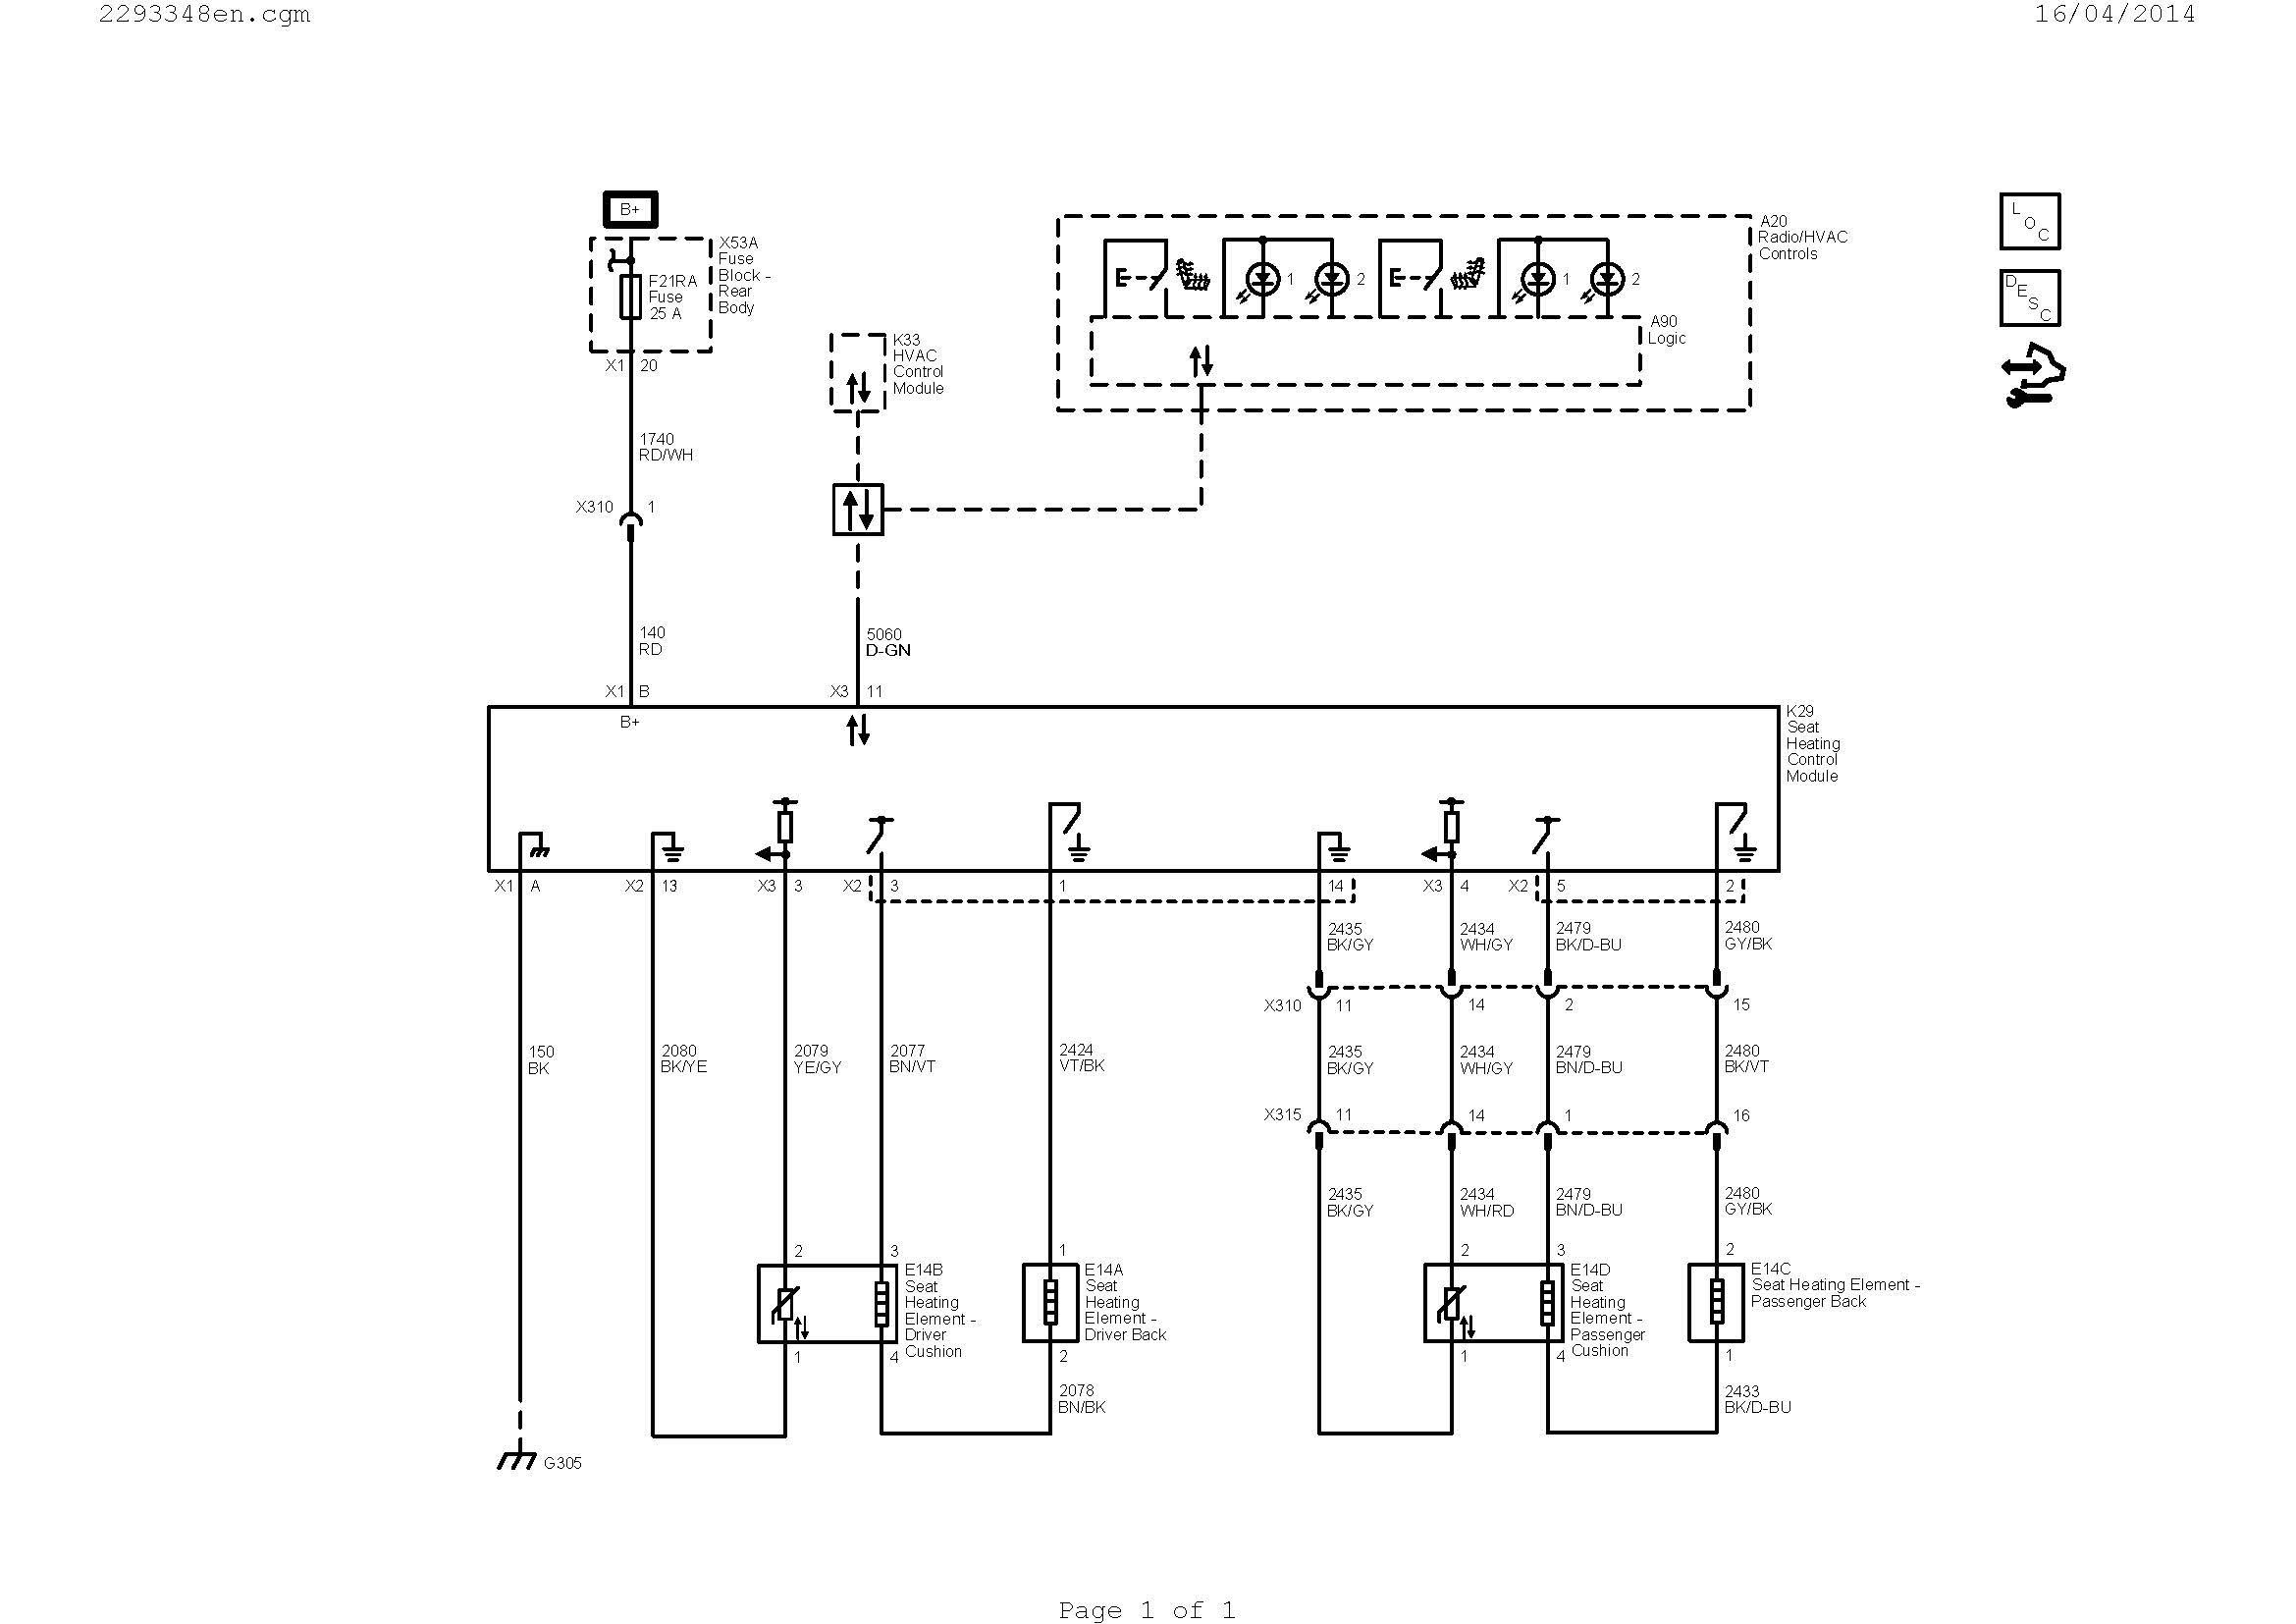 ac wiring diagram Collection Wiring Diagram For A Relay Switch Save Wiring Diagram Ac Valid